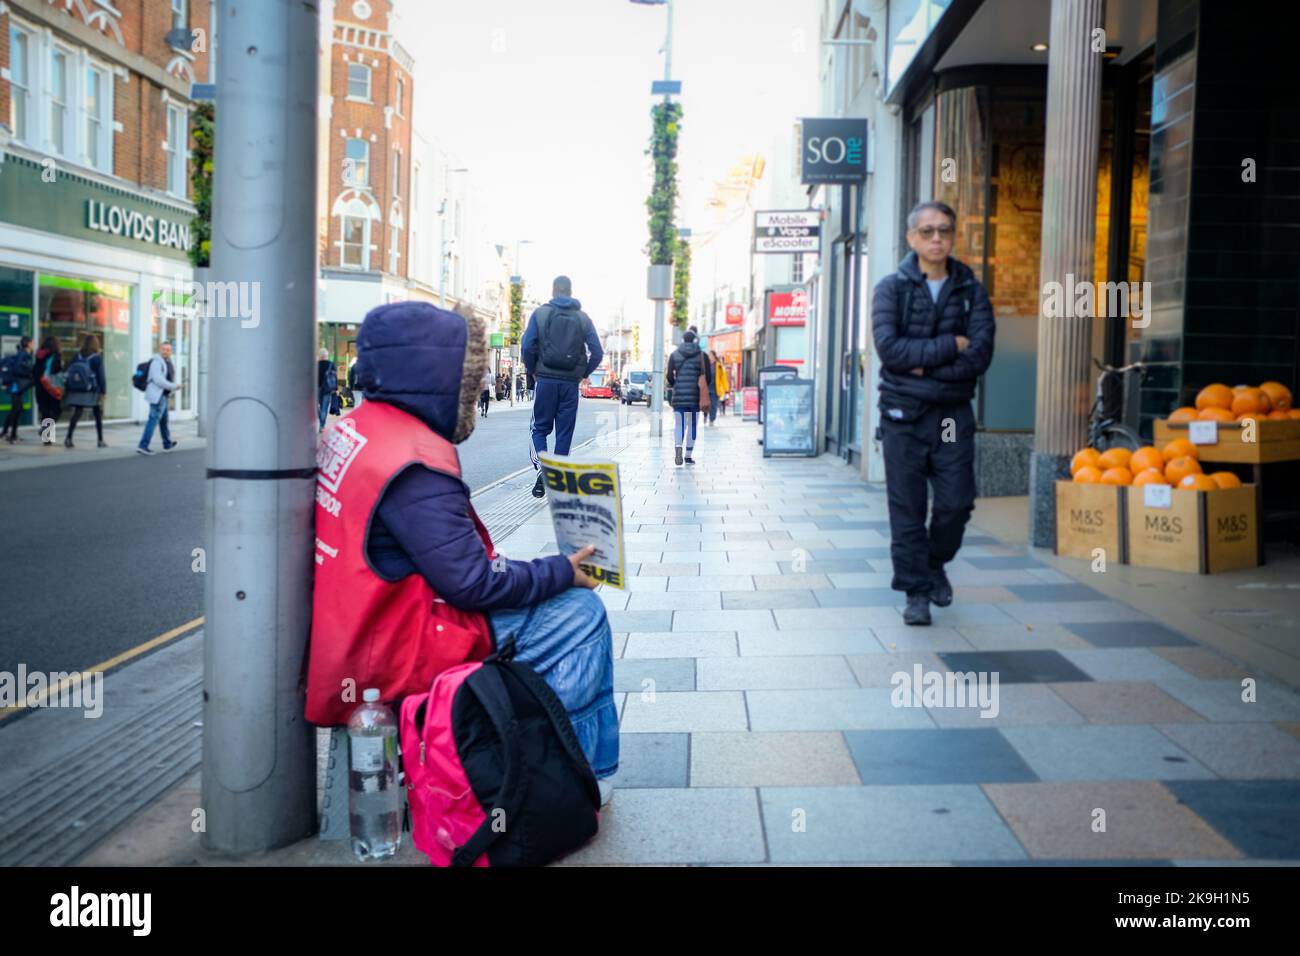 London- October 2022: A homeless person selling Big Issue magazines on Northcote Road, Clapham in south west London Stock Photo